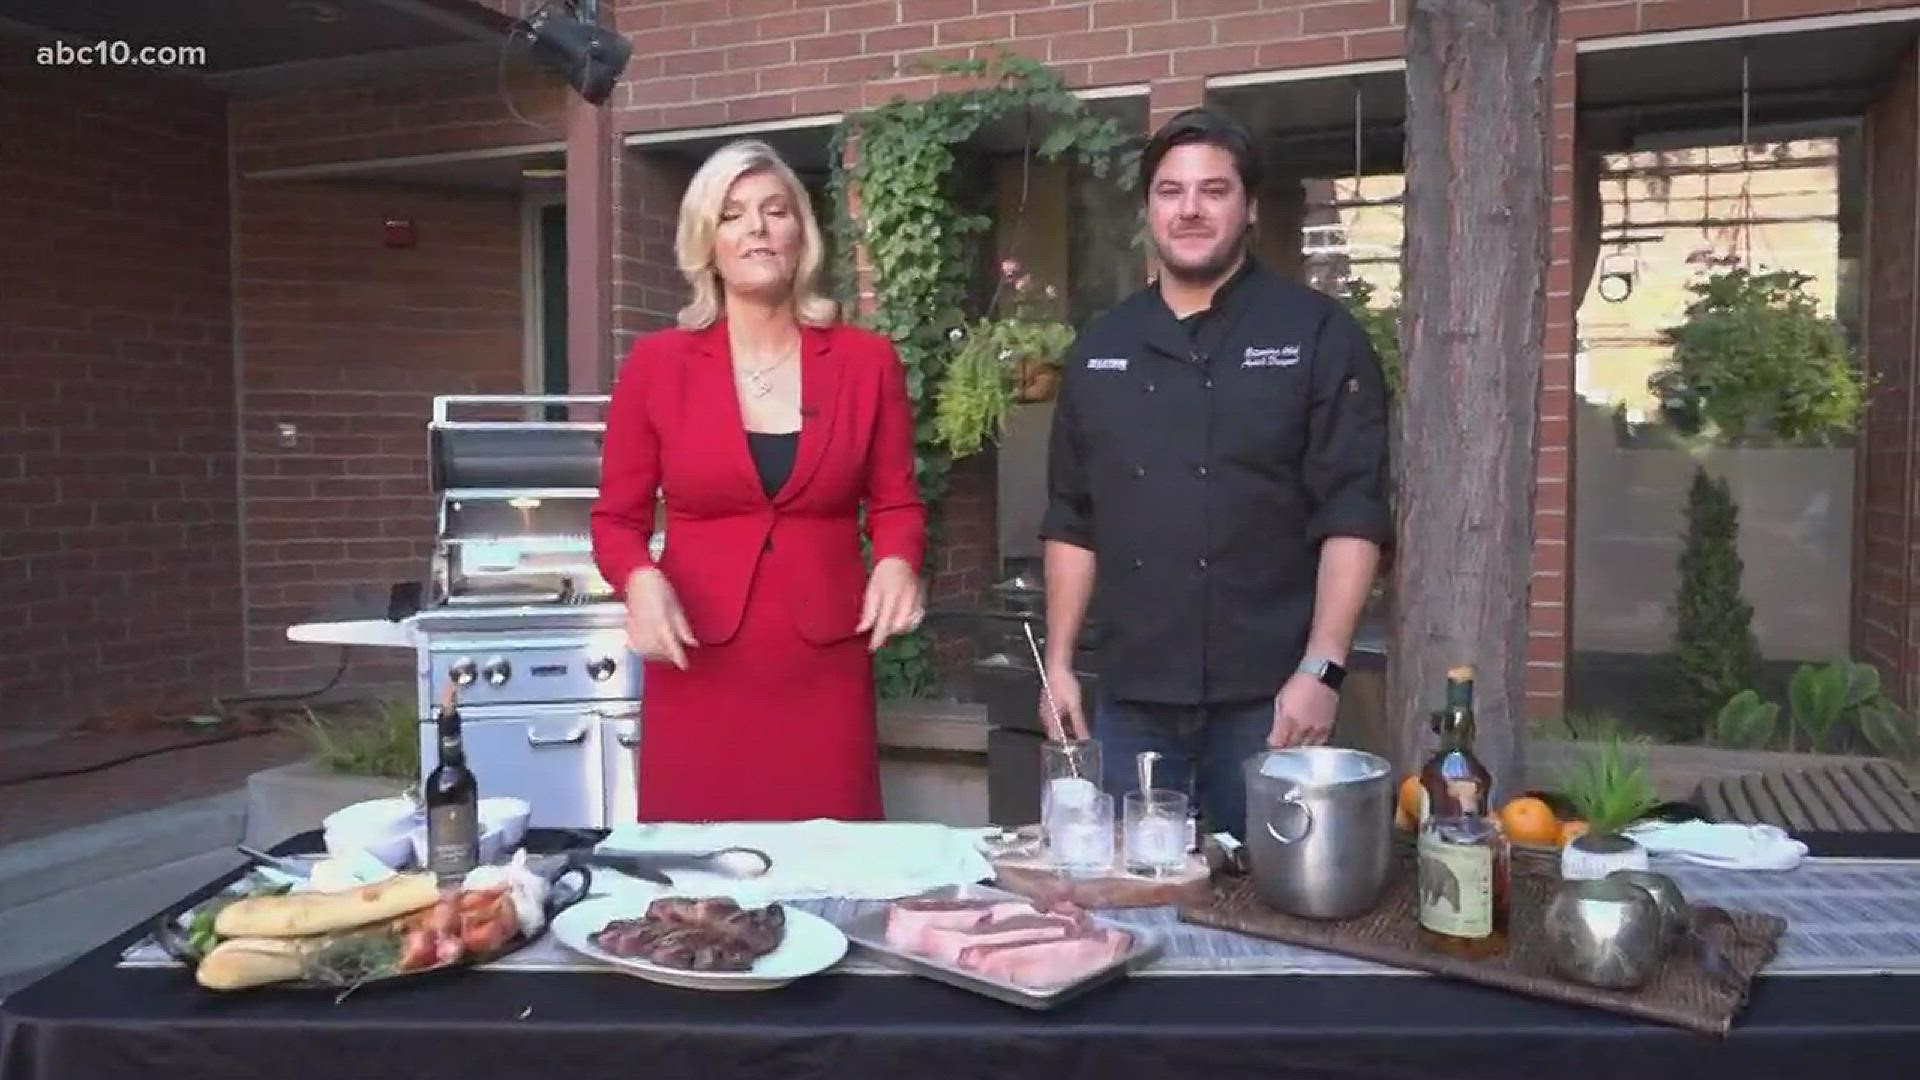 Chef from Lynx Grills joins us to give tips on grilling techniques and the different recipes to try.